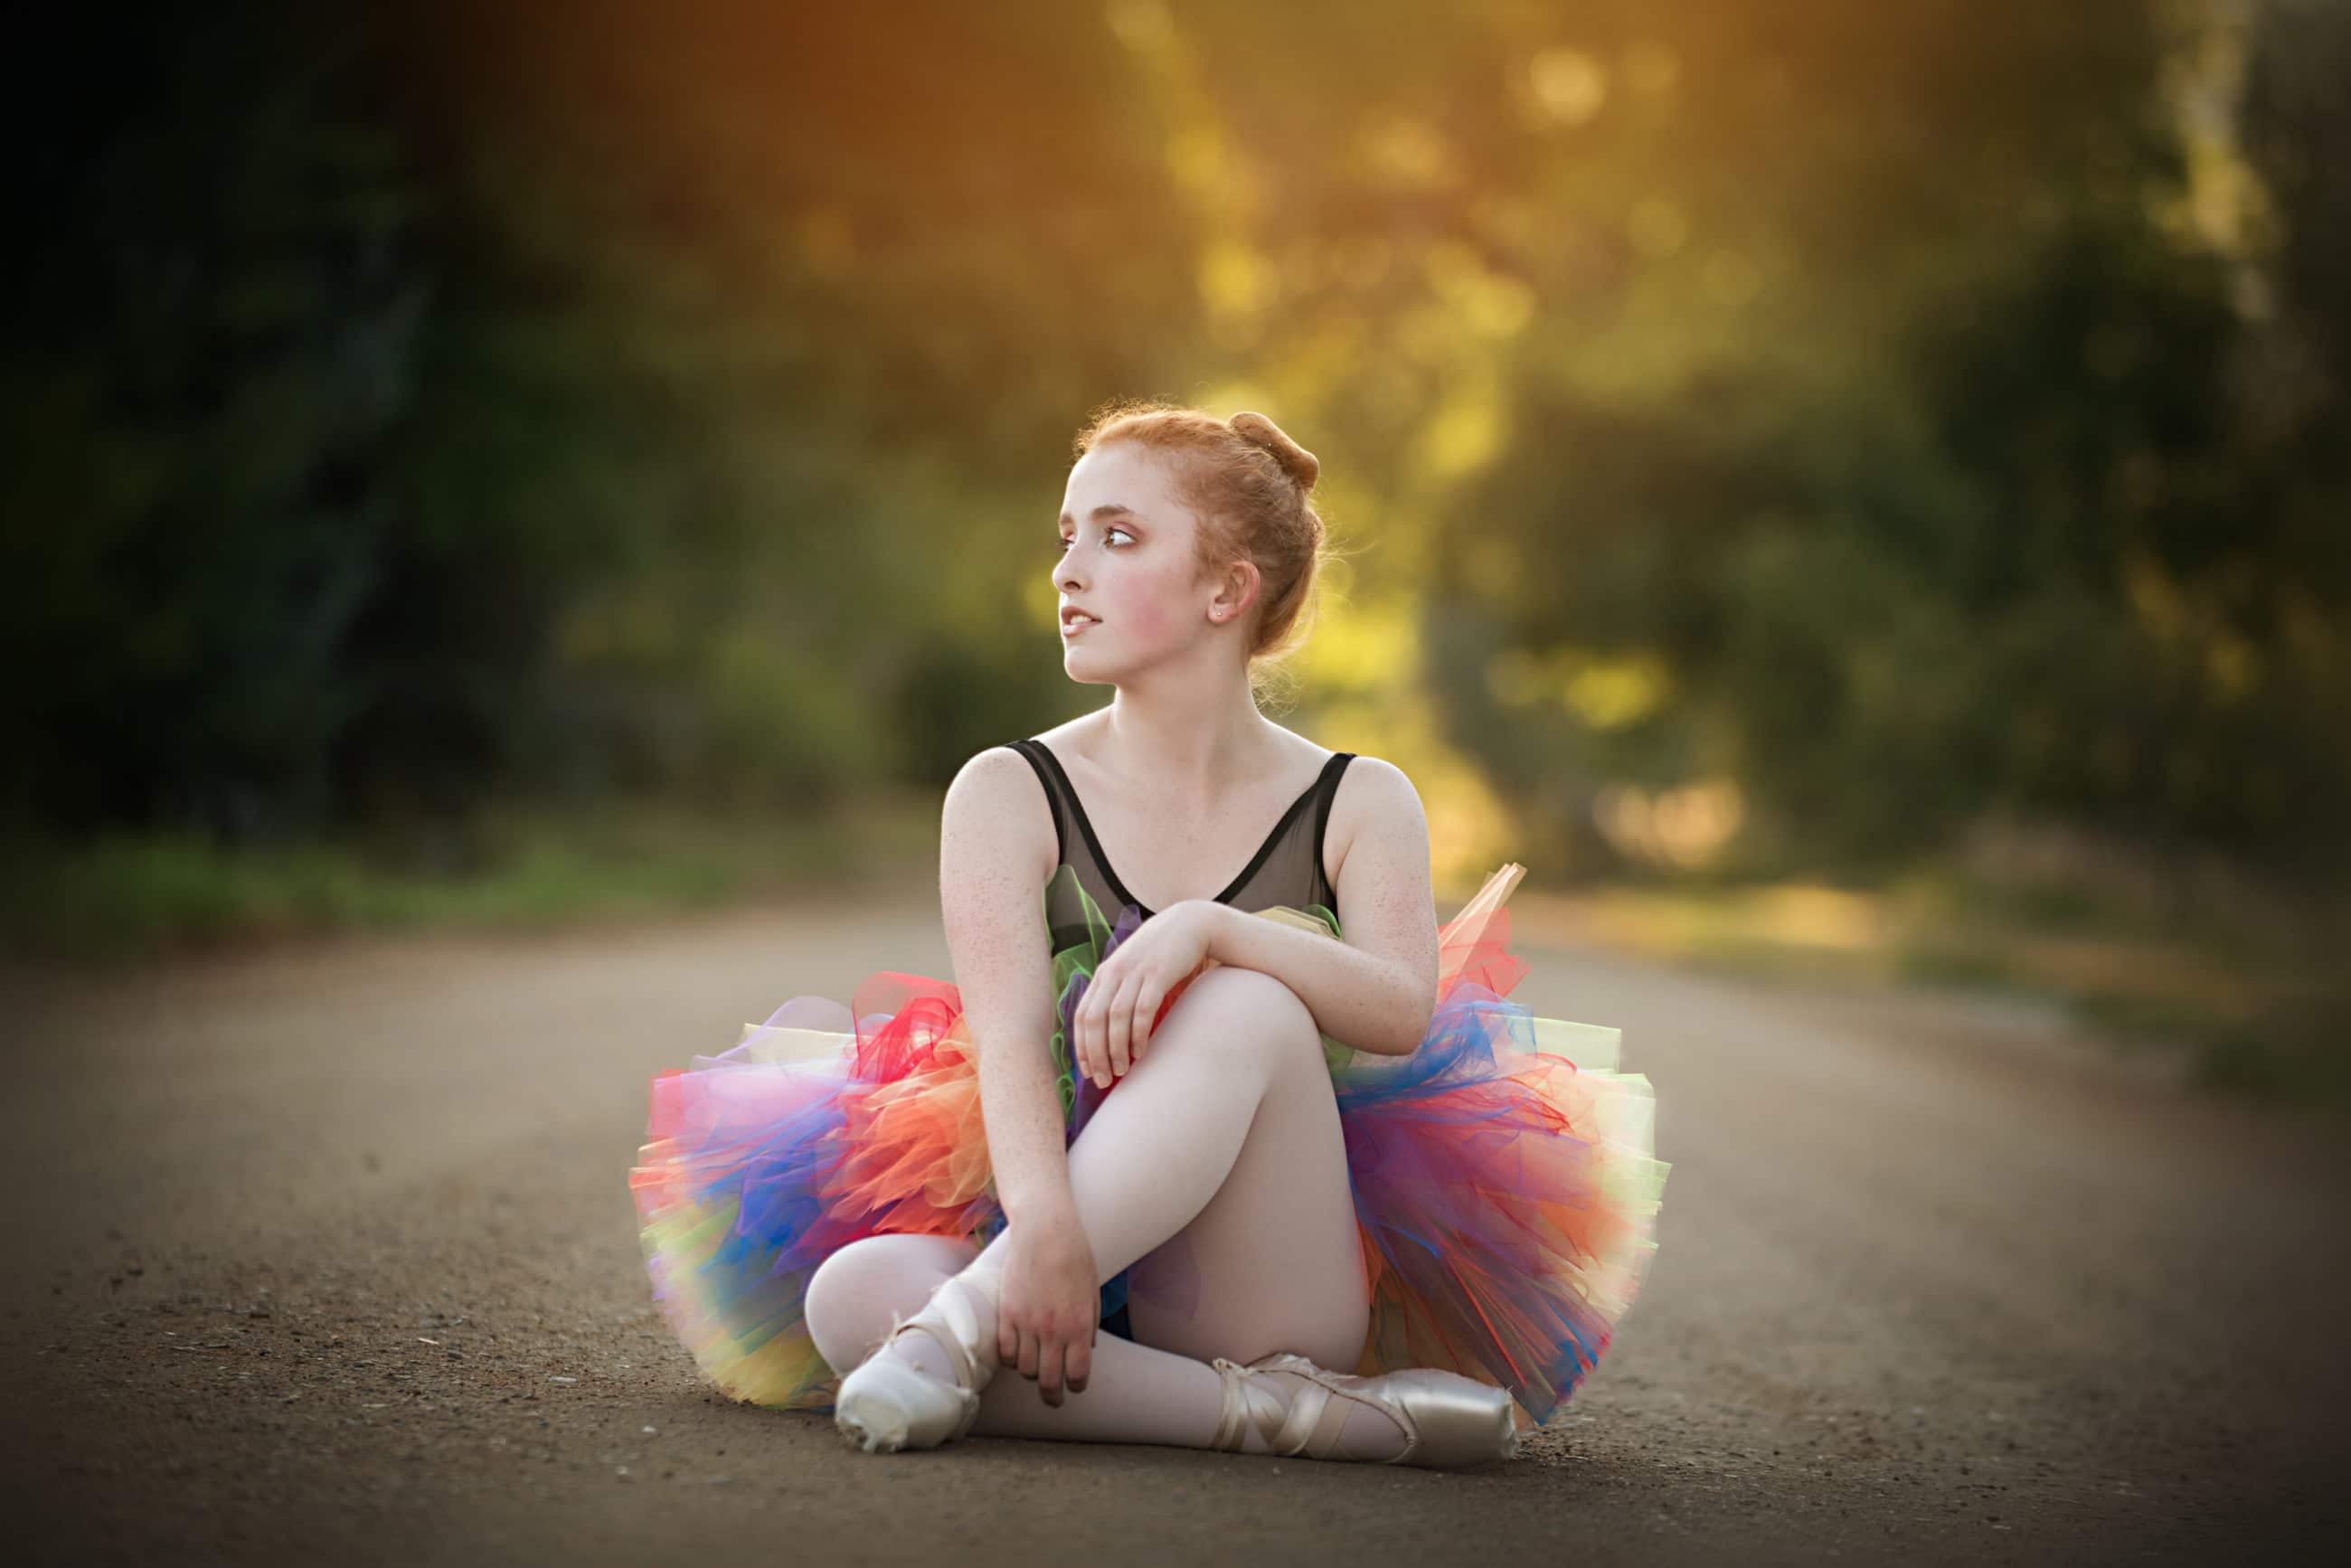 ballerina sitting on dirt road with pointe shoes and tutu - boulder senior photographer